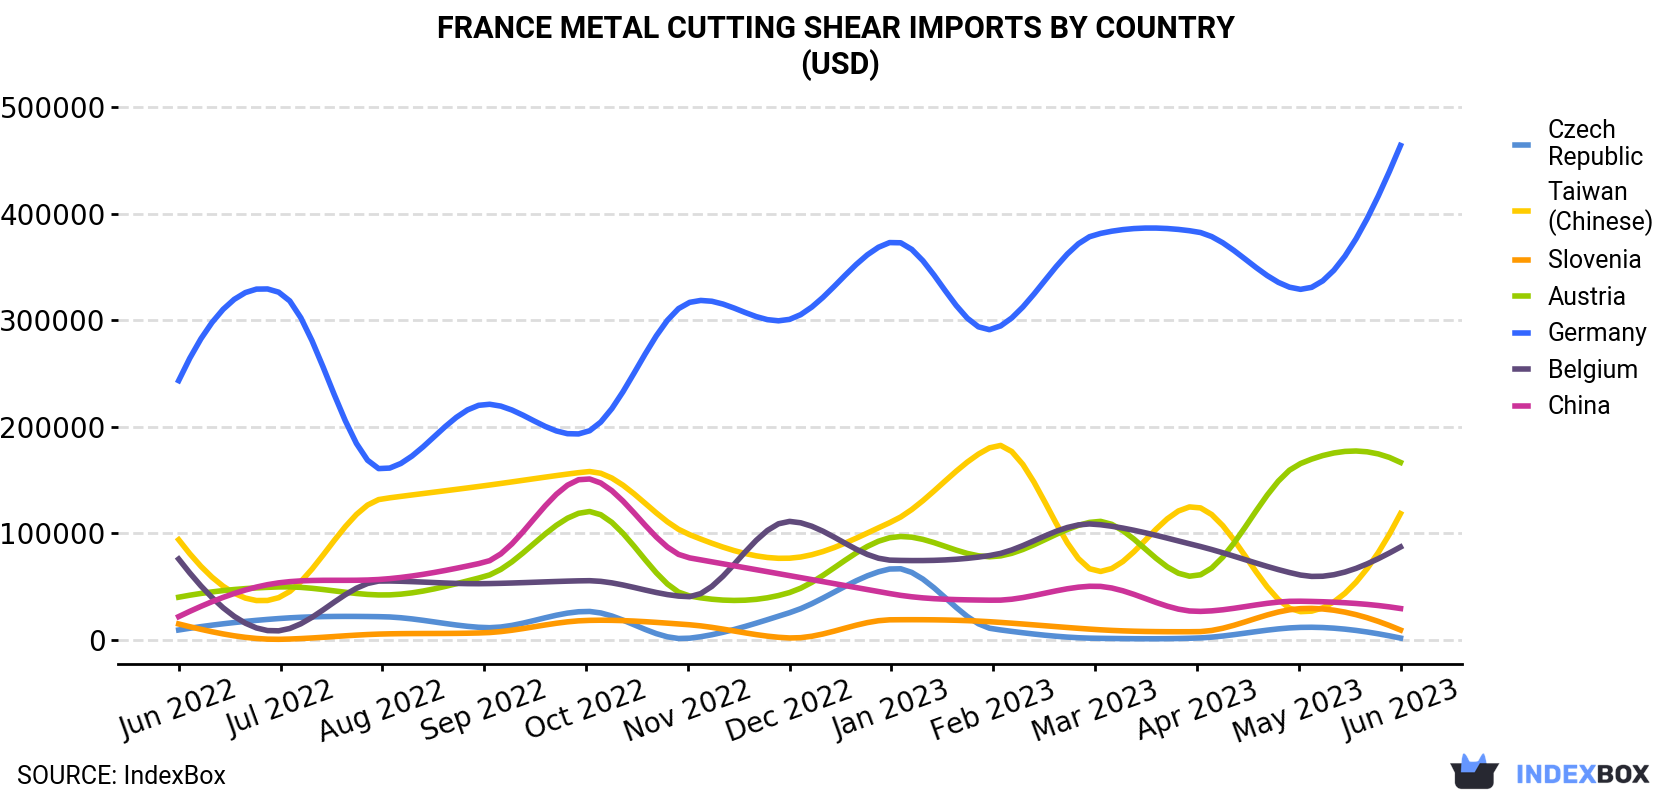 France Metal Cutting Shear Imports By Country (USD)